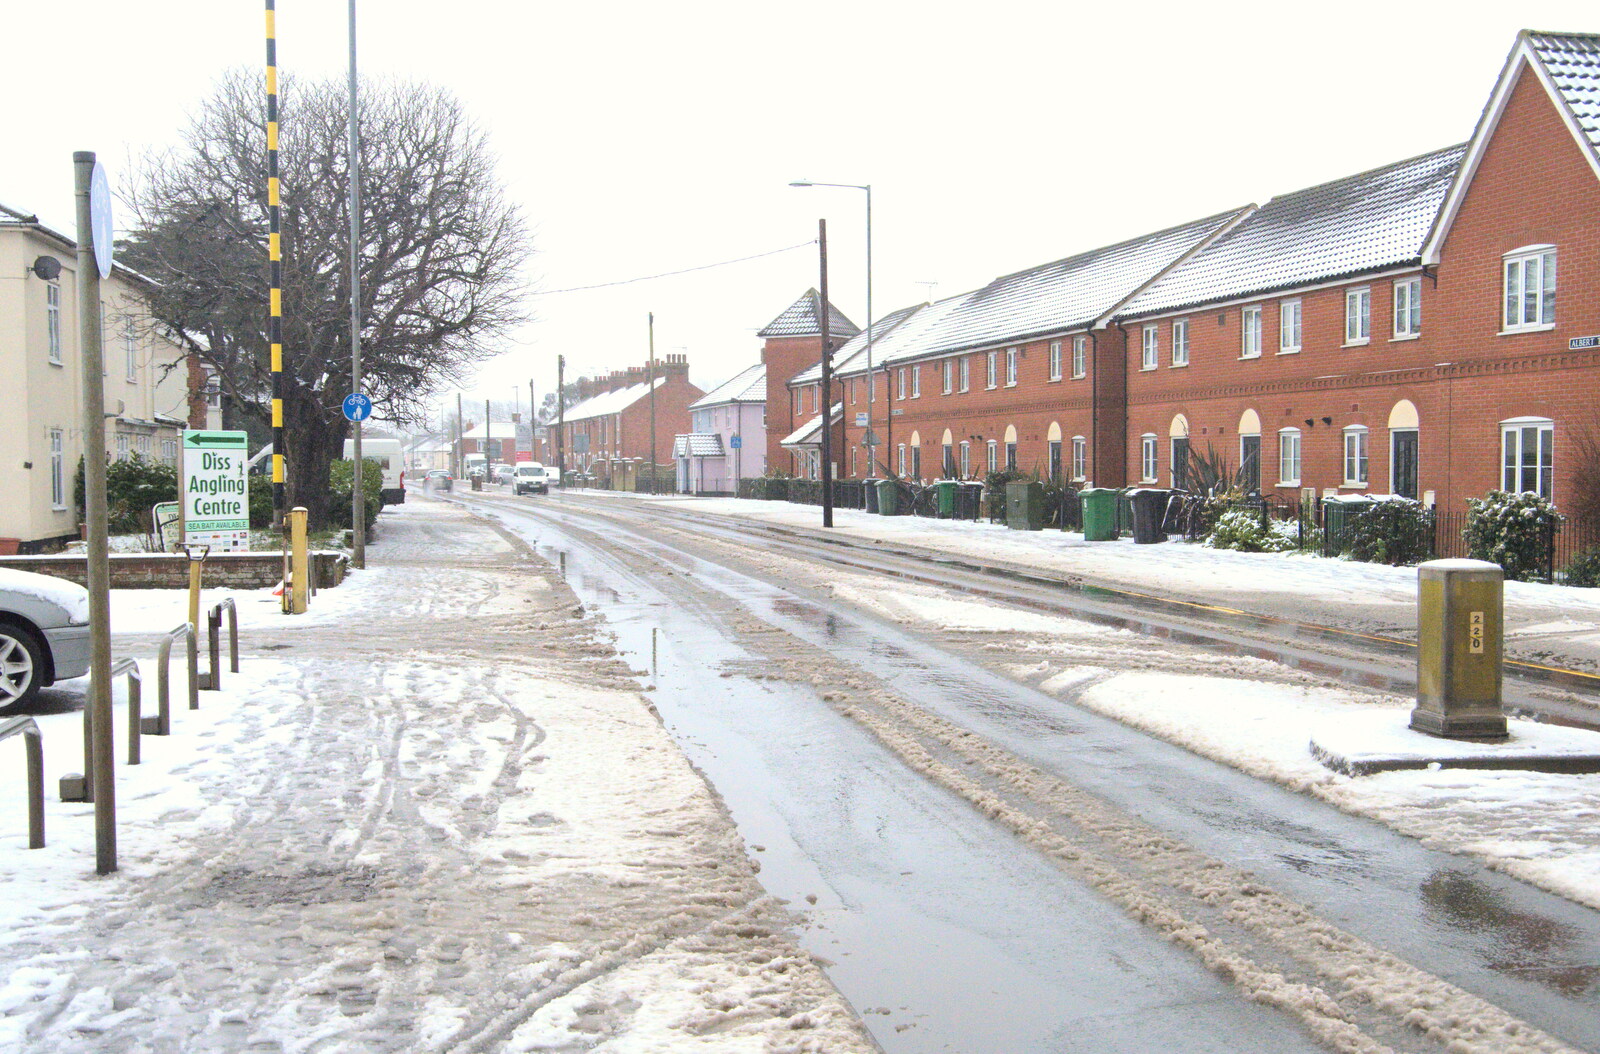 Victoria Road from A Snowy Morning, Diss, Norfolk - 16th January 2021